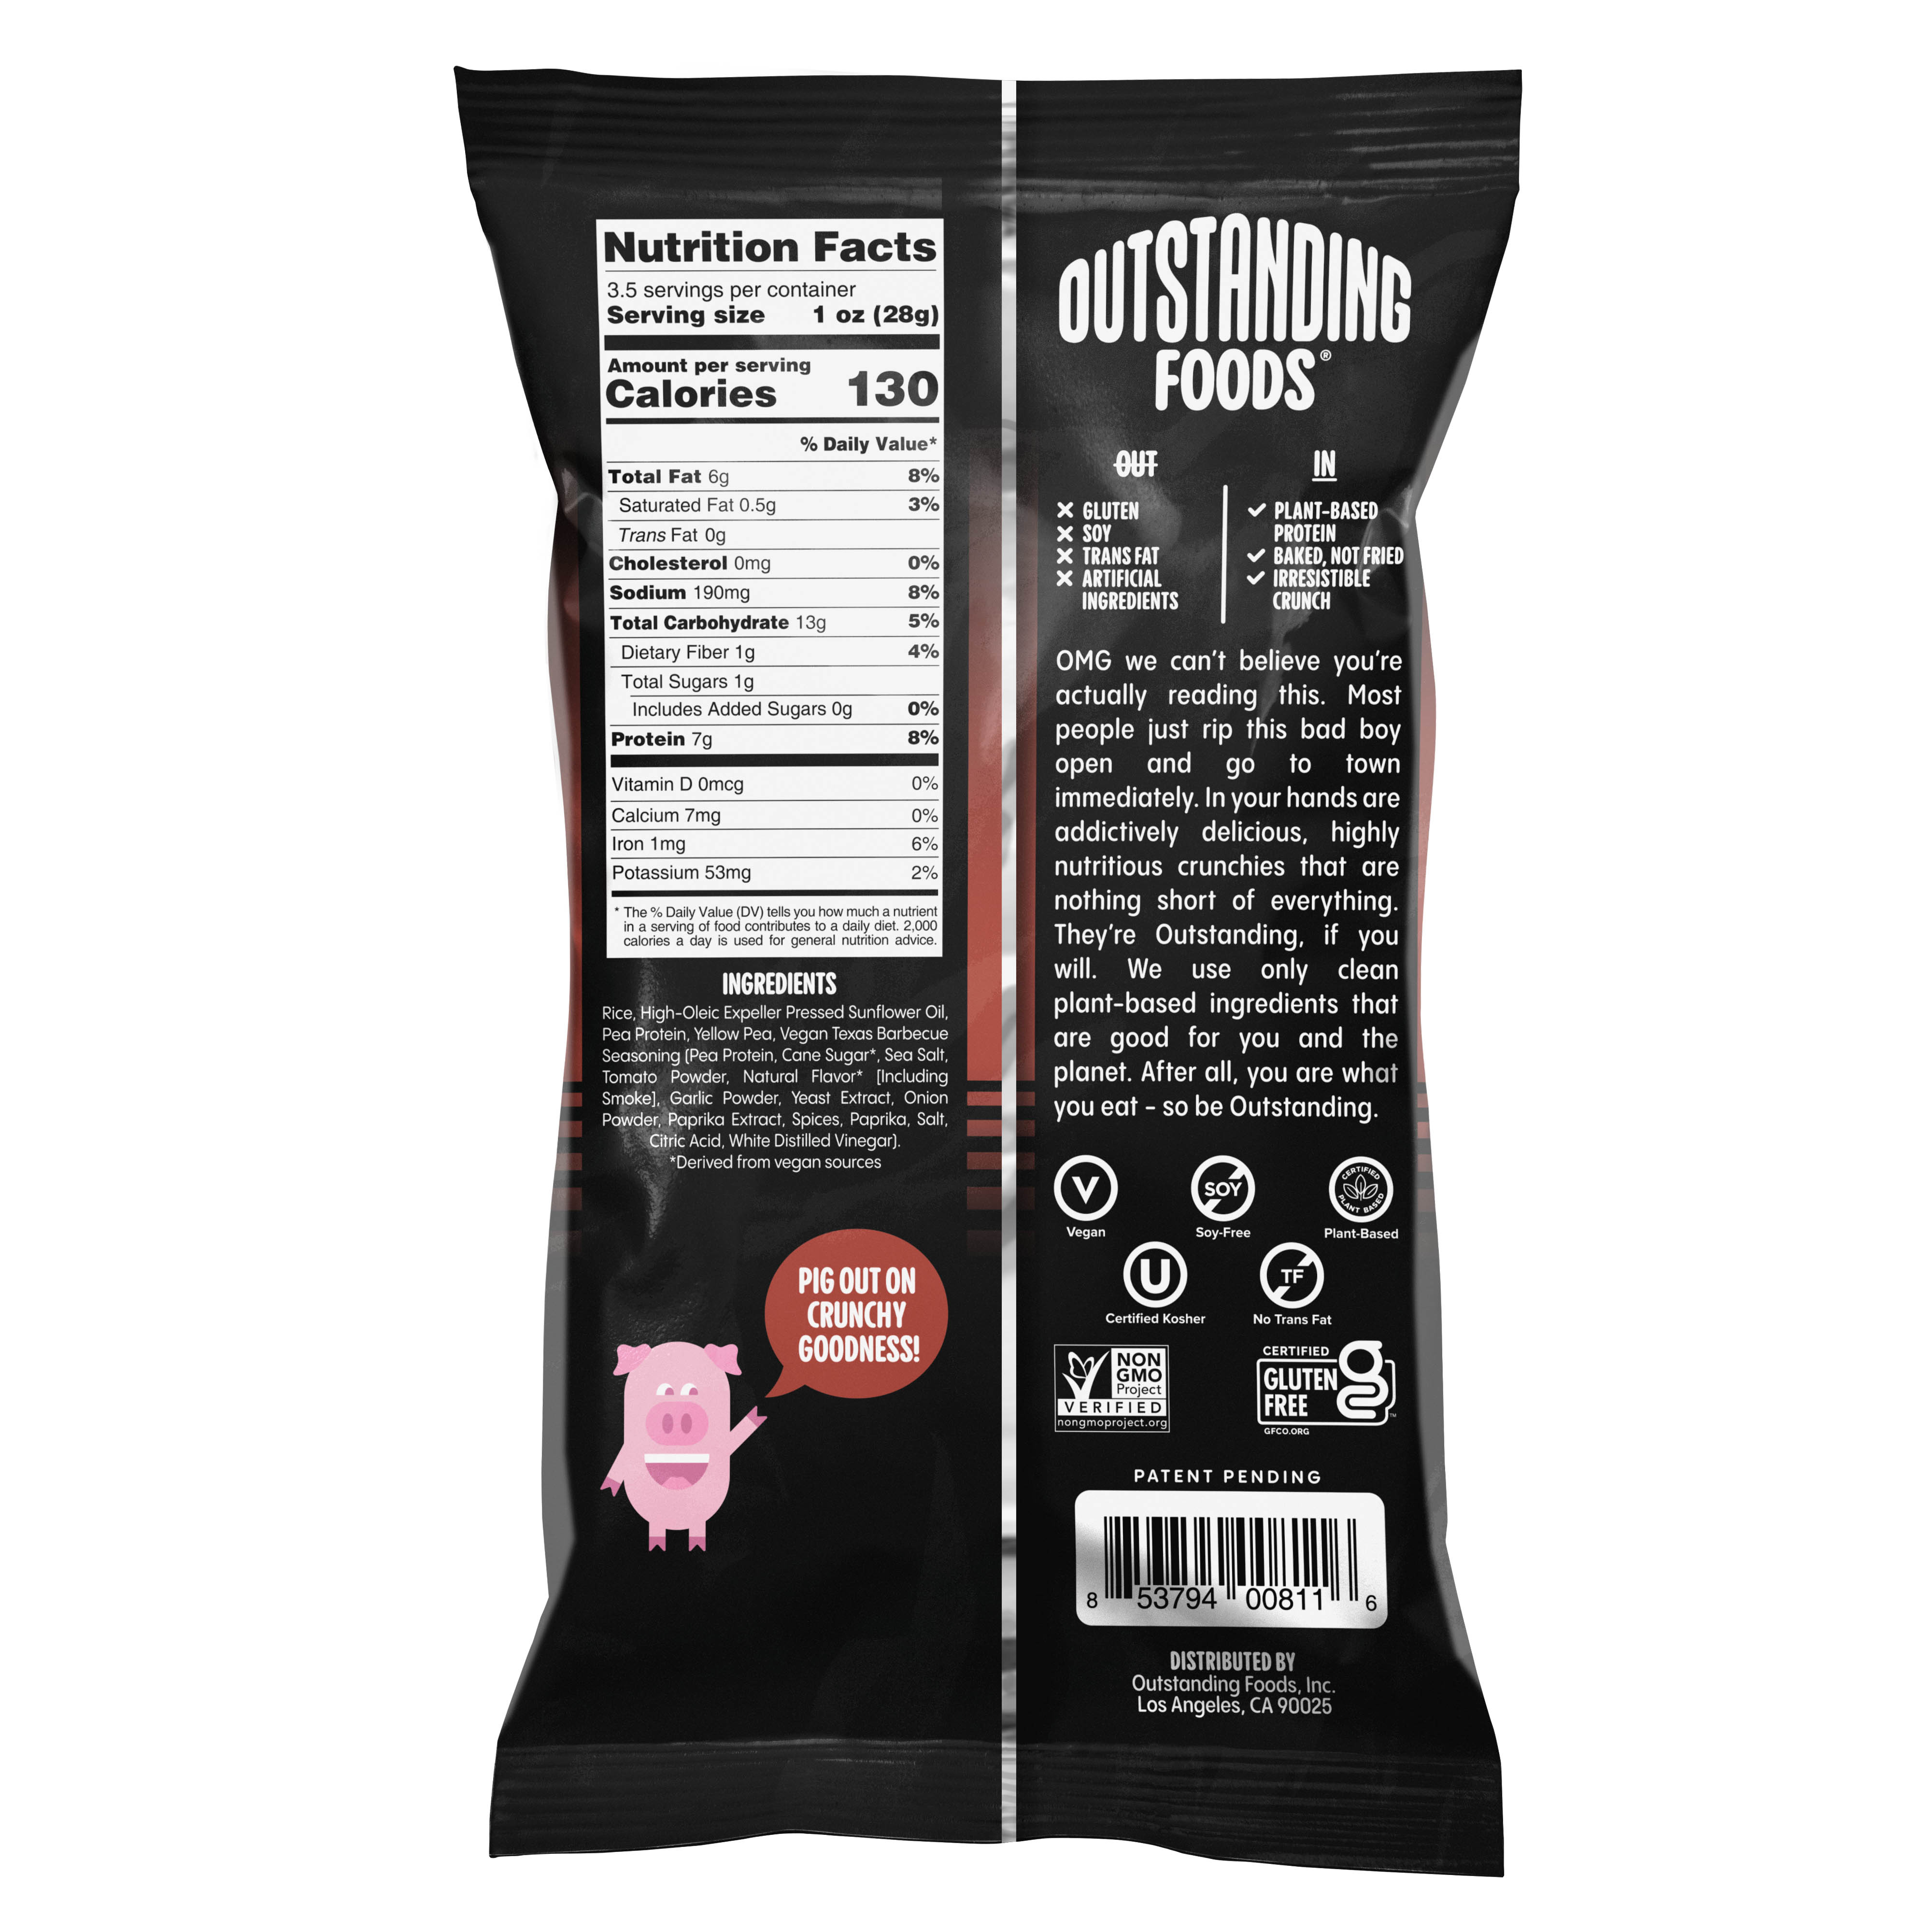 Outstanding Foods - Outstanding Pig Out Crunchies, Texas BBQ 12 units per case 3.5 oz